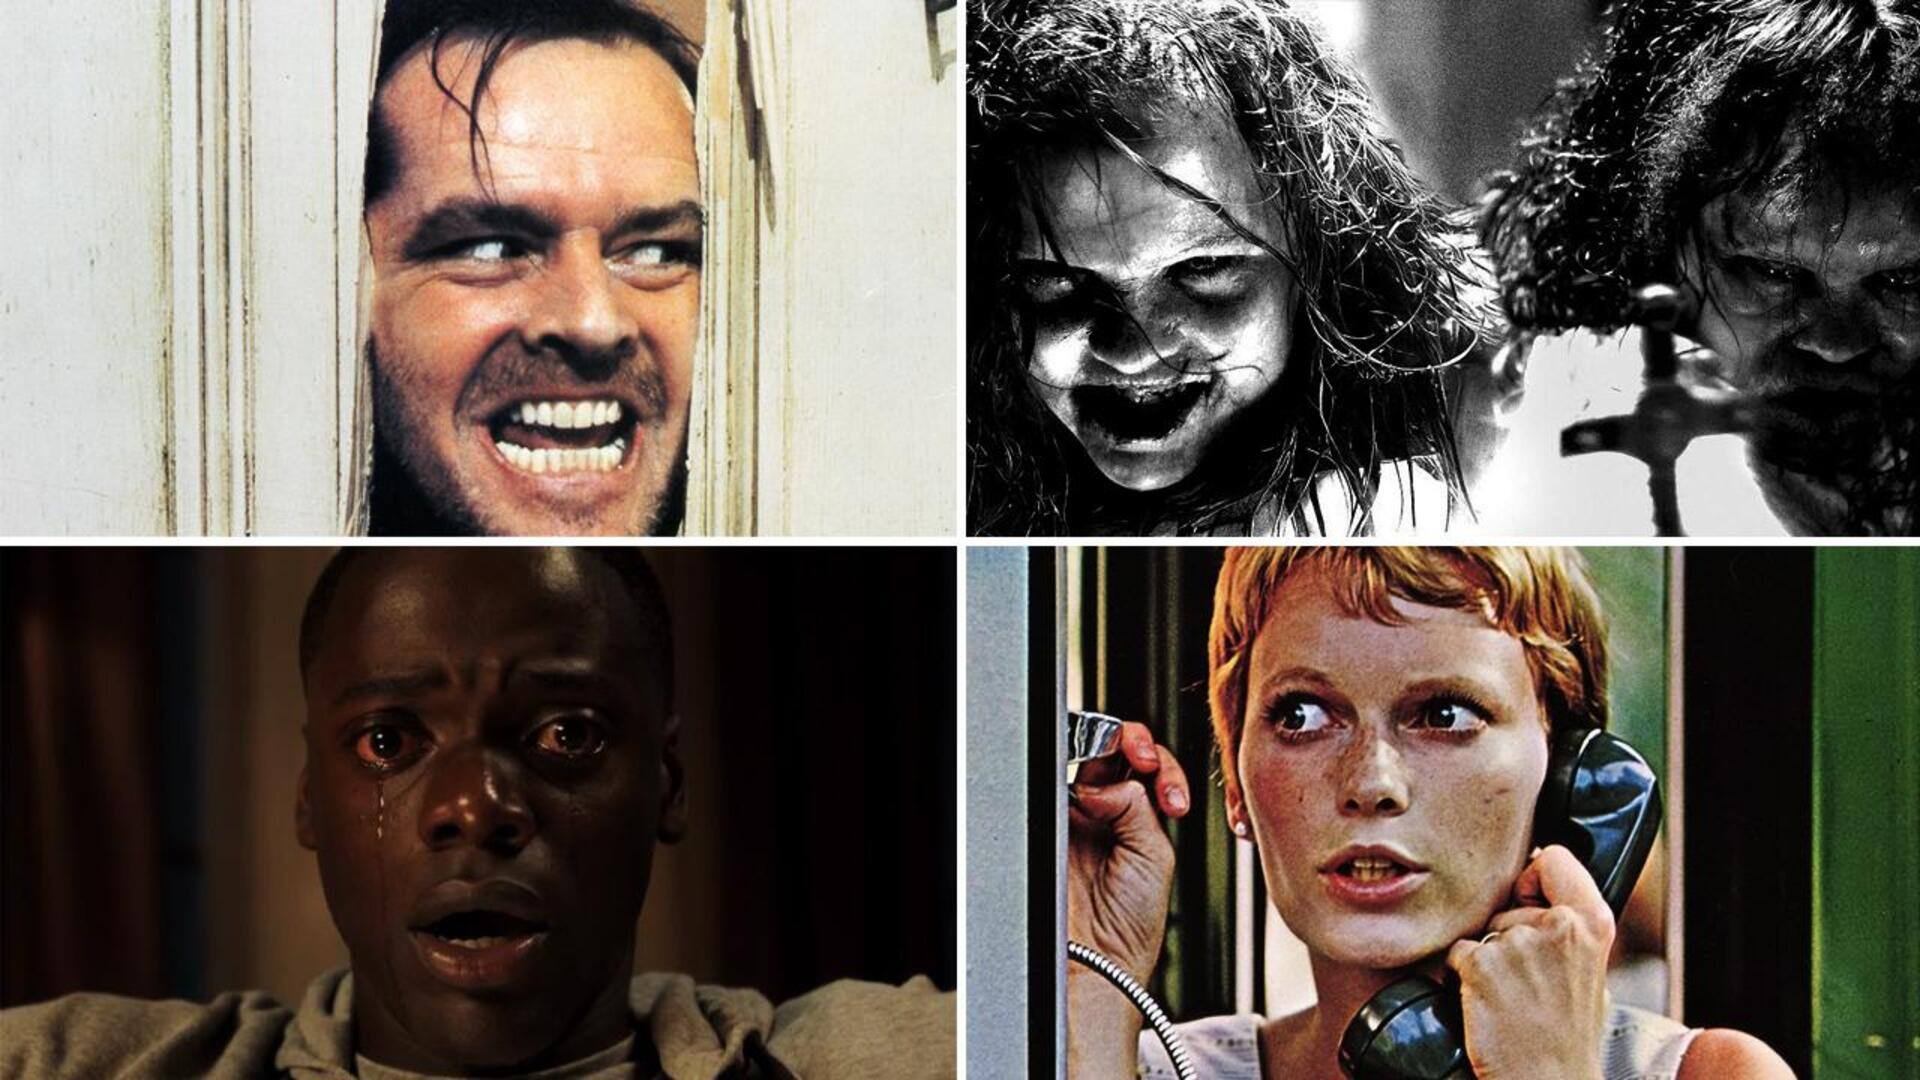 'The Shining' to 'Get Out': Best IMDb-rated horror movies